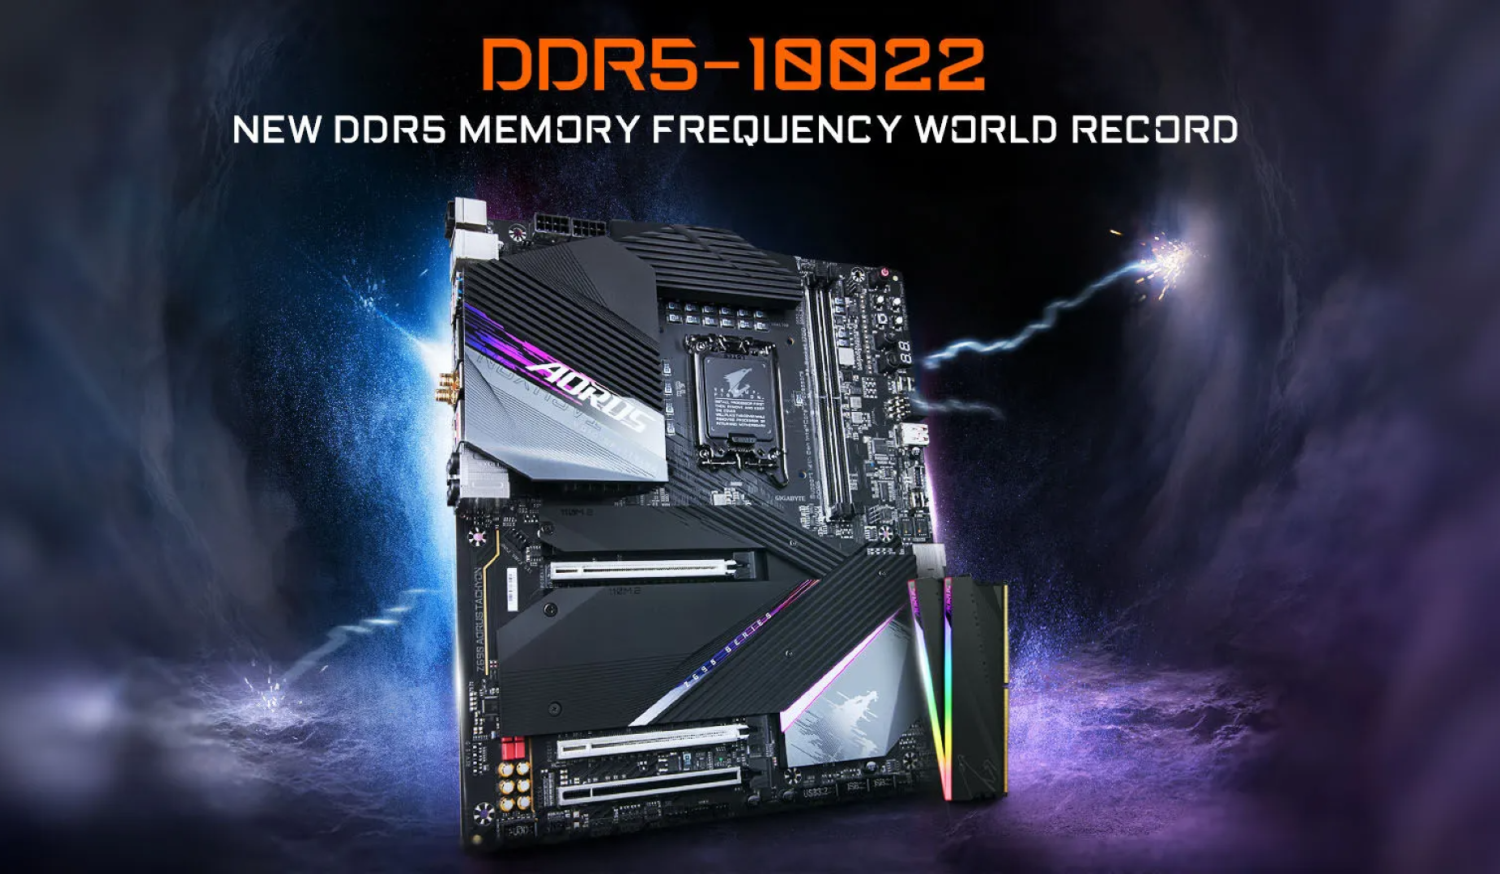 GIGABYTE edges MSI out: DDR5-10022 overclock sets NEW world record | TweakTown